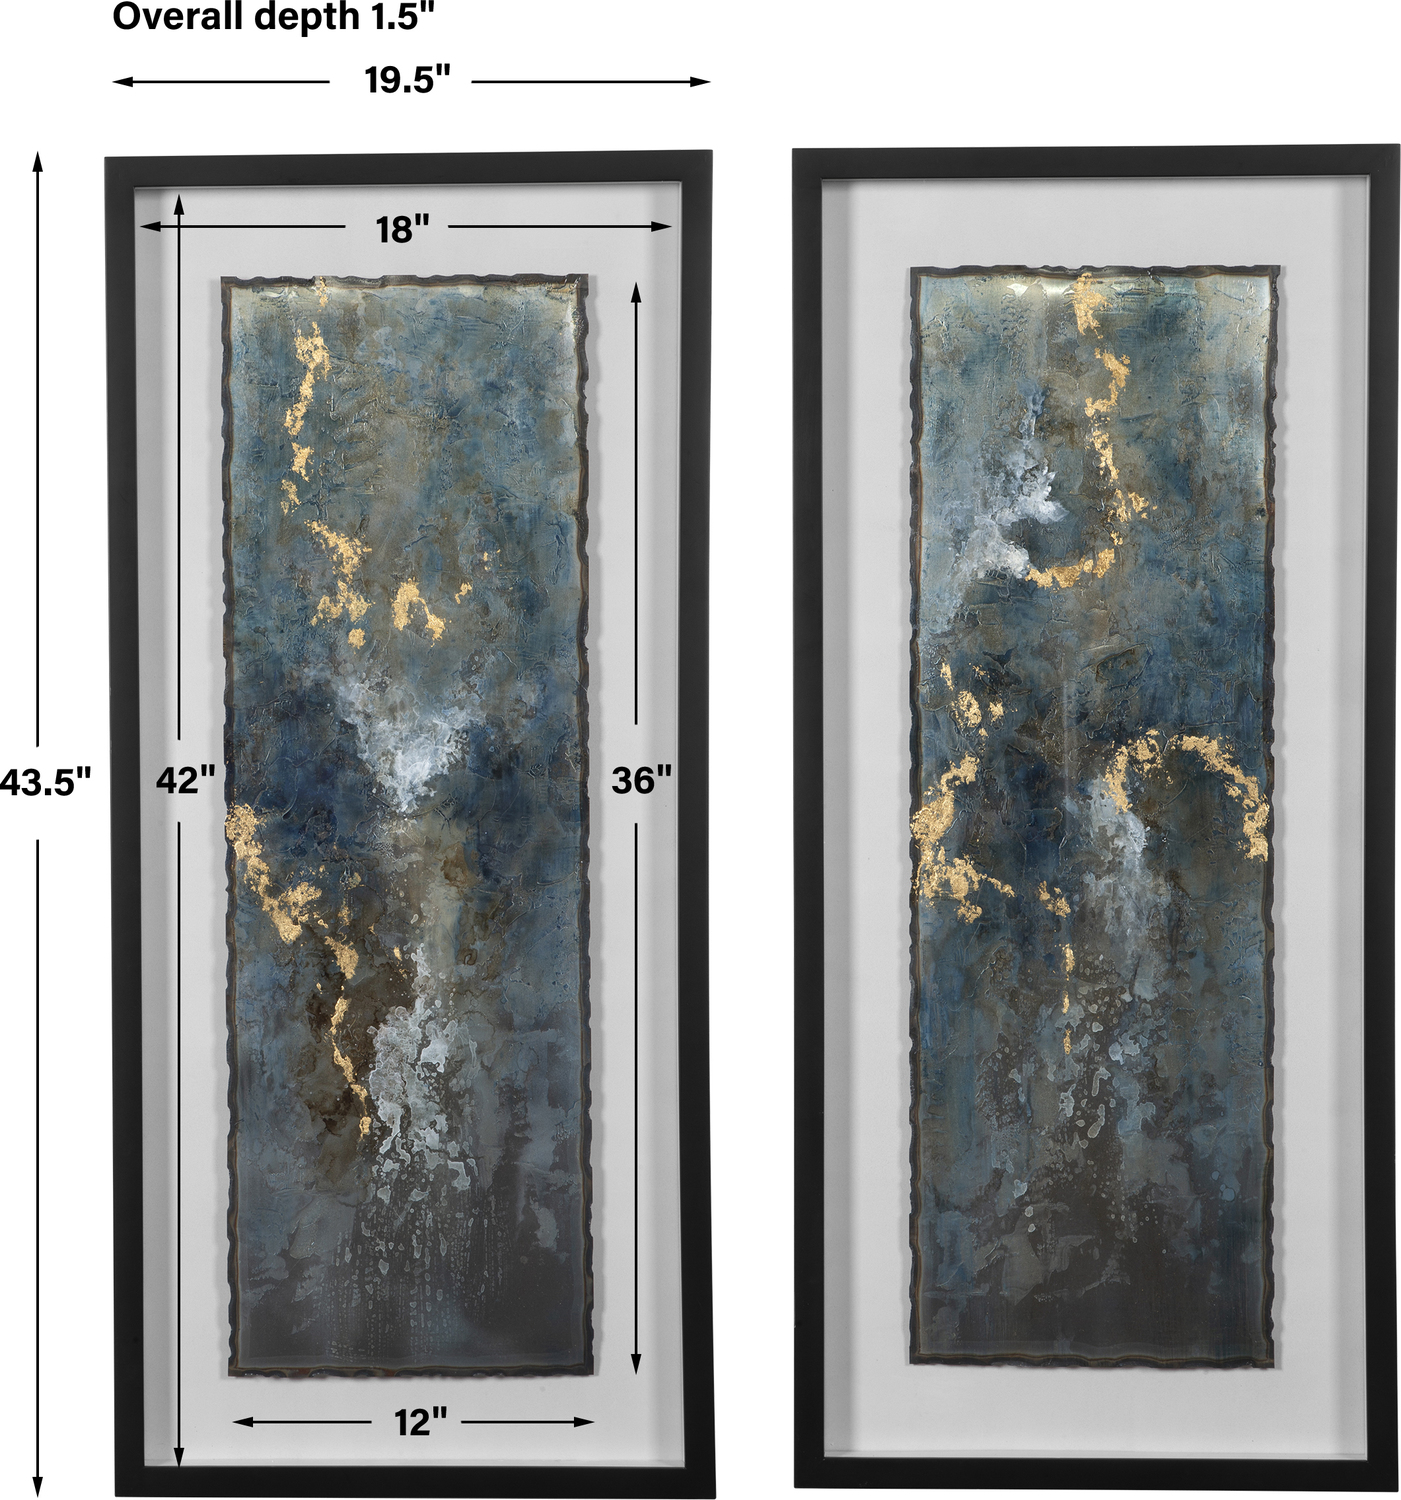 vine wall decor Uttermost Abstract Art Black Shadowbox Style Frame, Torn Edge, Metal Sheet, Oatmeal Linen Backing, Turquoise, Blue, Gold Leaf, White